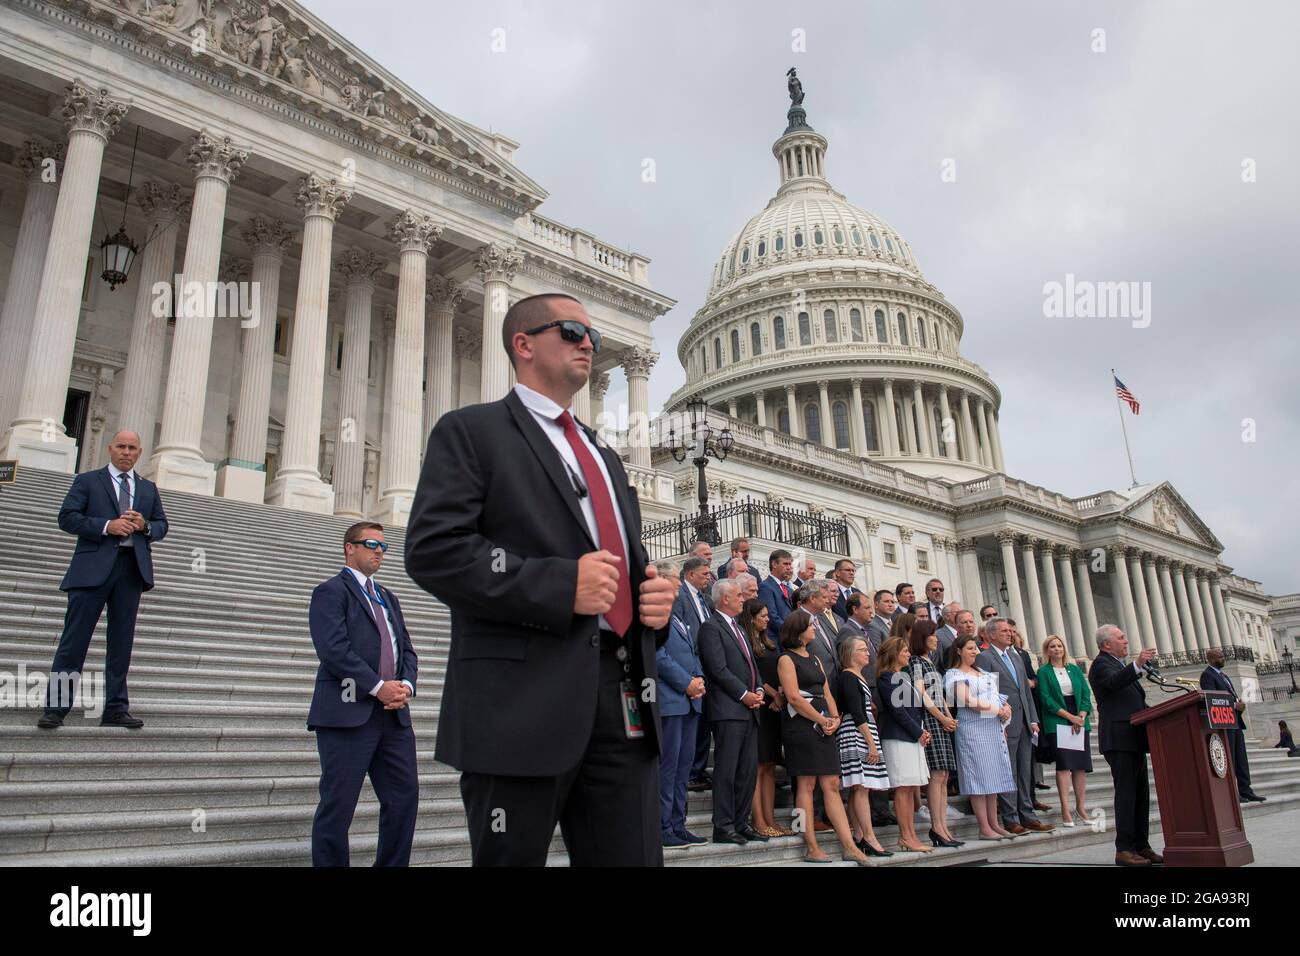 Washington, United States Of America. 29th July, 2021. United States House Minority Whip Steve Scalise (Republican of Louisiana) offers remarks on President Joe Biden and House Speaker Nancy Pelosi's leadership during a press conference outside of the US Capitol in Washington, DC, Thursday, July 29, 2021. Credit: Rod Lamkey/CNP/Sipa USA Credit: Sipa USA/Alamy Live News Stock Photo